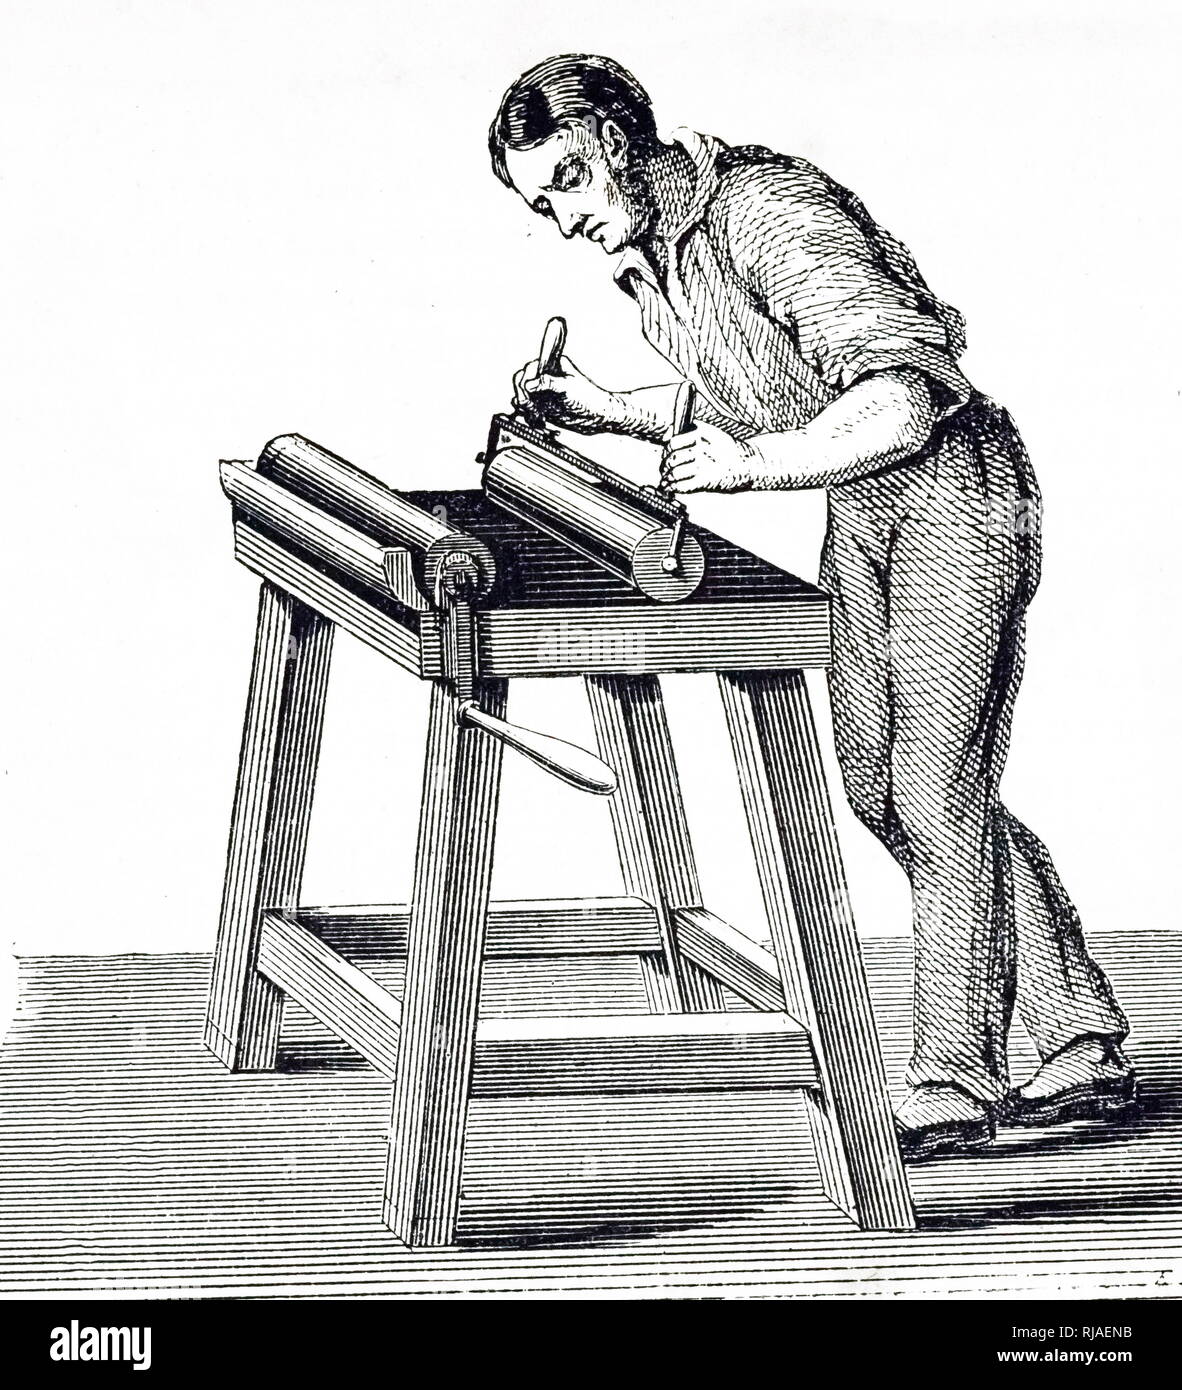 An engraving depicting a man using a roller to apply ink to type in a forme. Dated 19th century Stock Photo